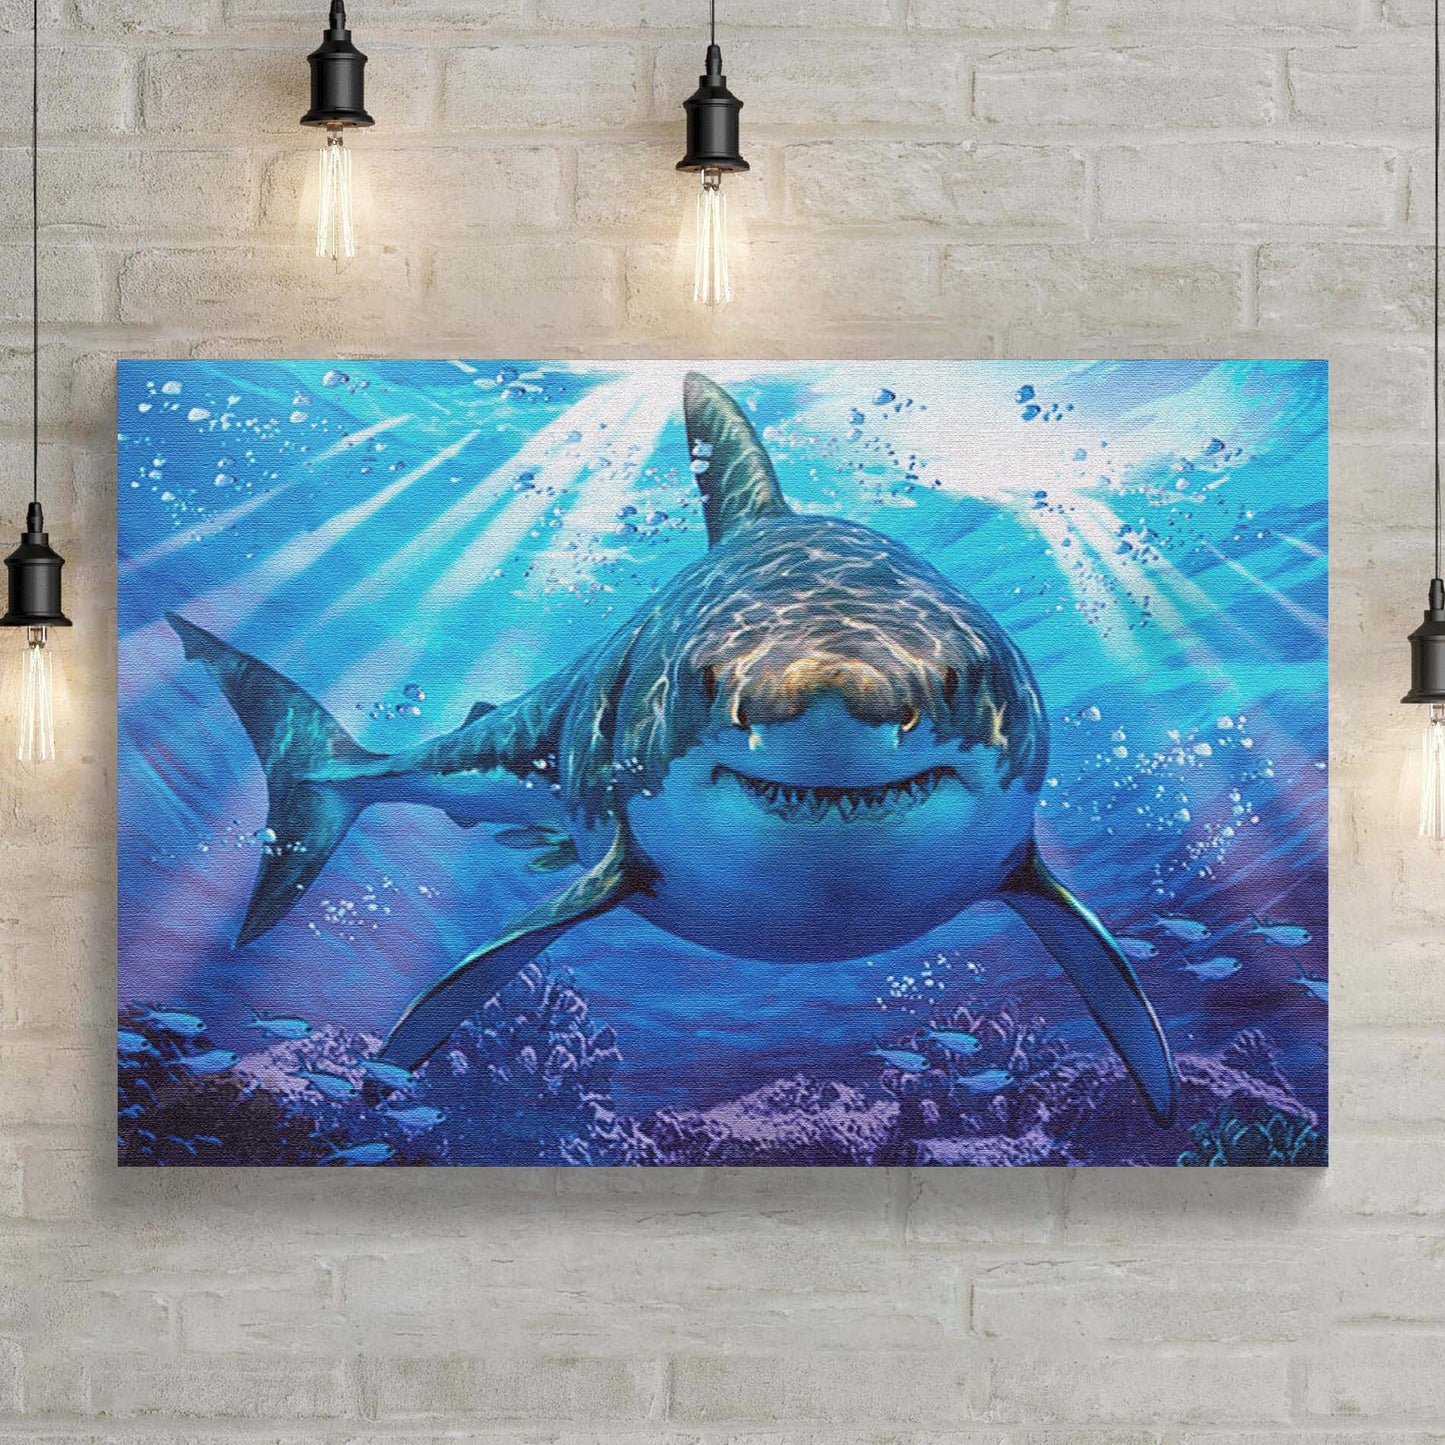 Underwater White Shark Canvas Wall Art Style 1 - Image by Tailored Canvases